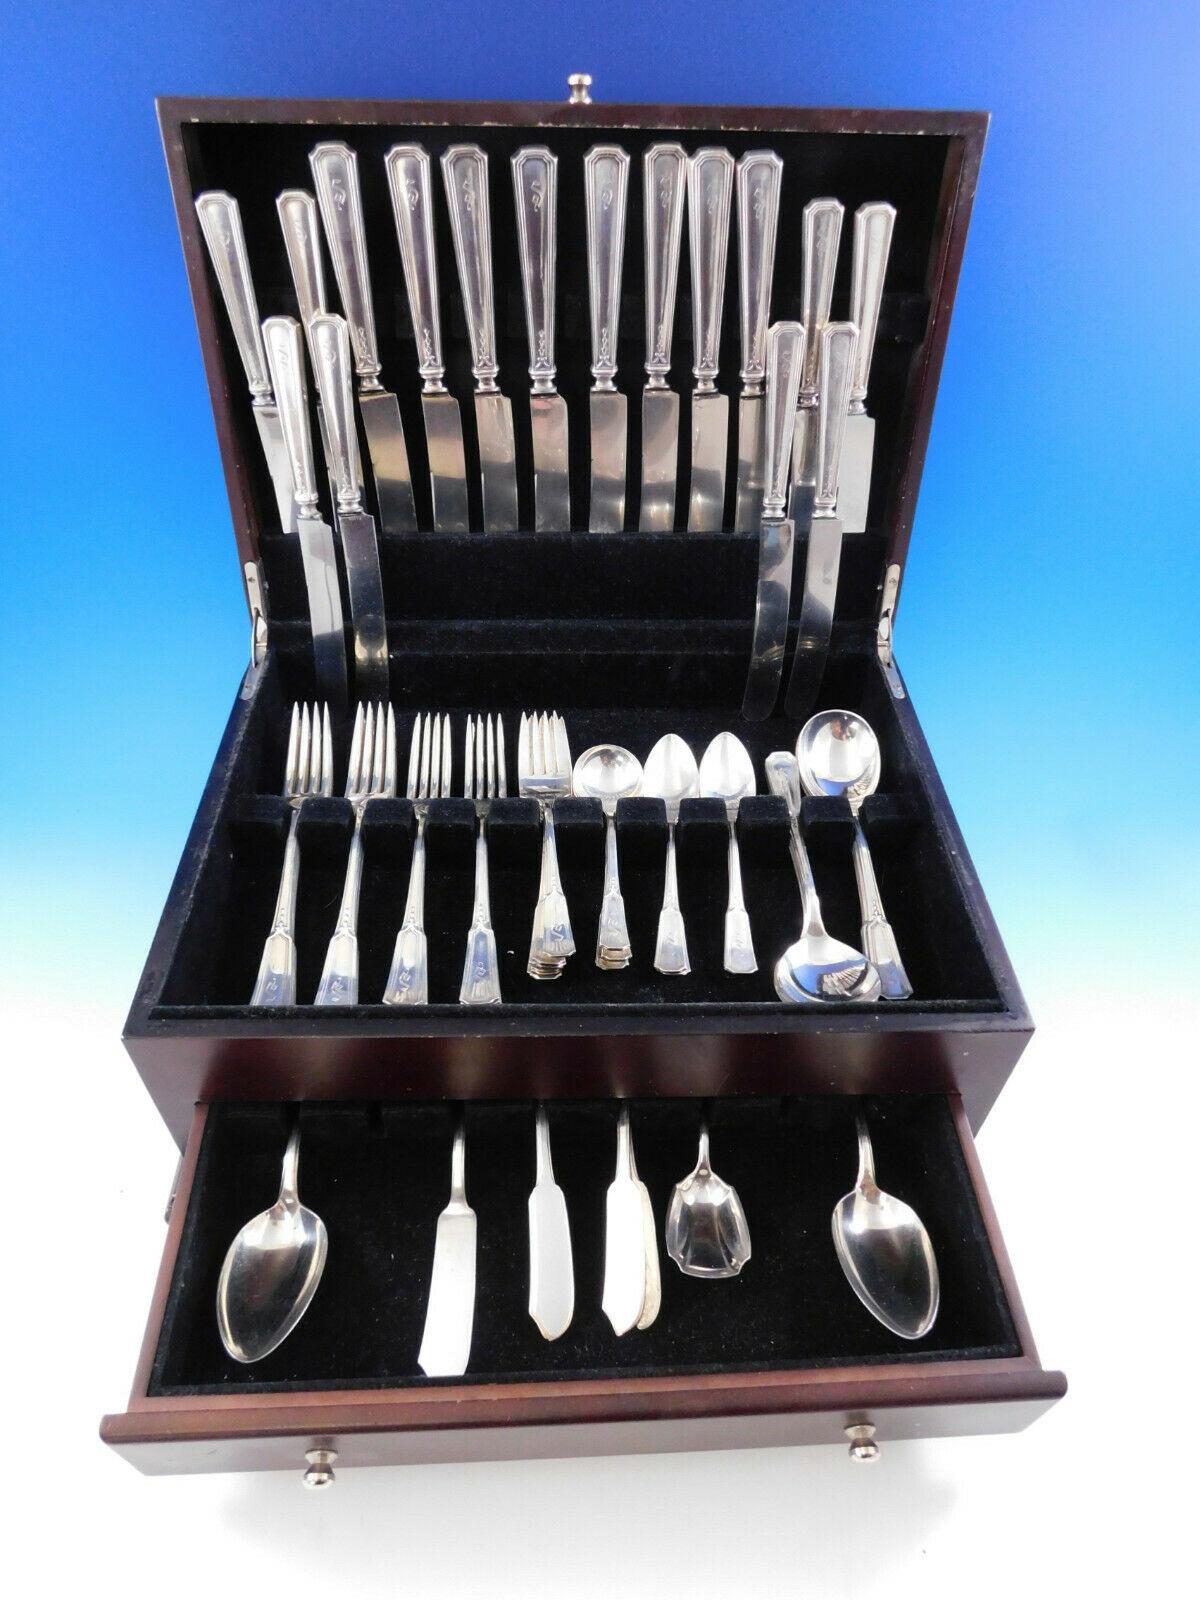 Rare dinner and luncheon size Florence Nightingale by Alvin circa 1919 sterling silver flatware set, 76 pieces. This set includes:

8 dinner size knives, 9 3/4